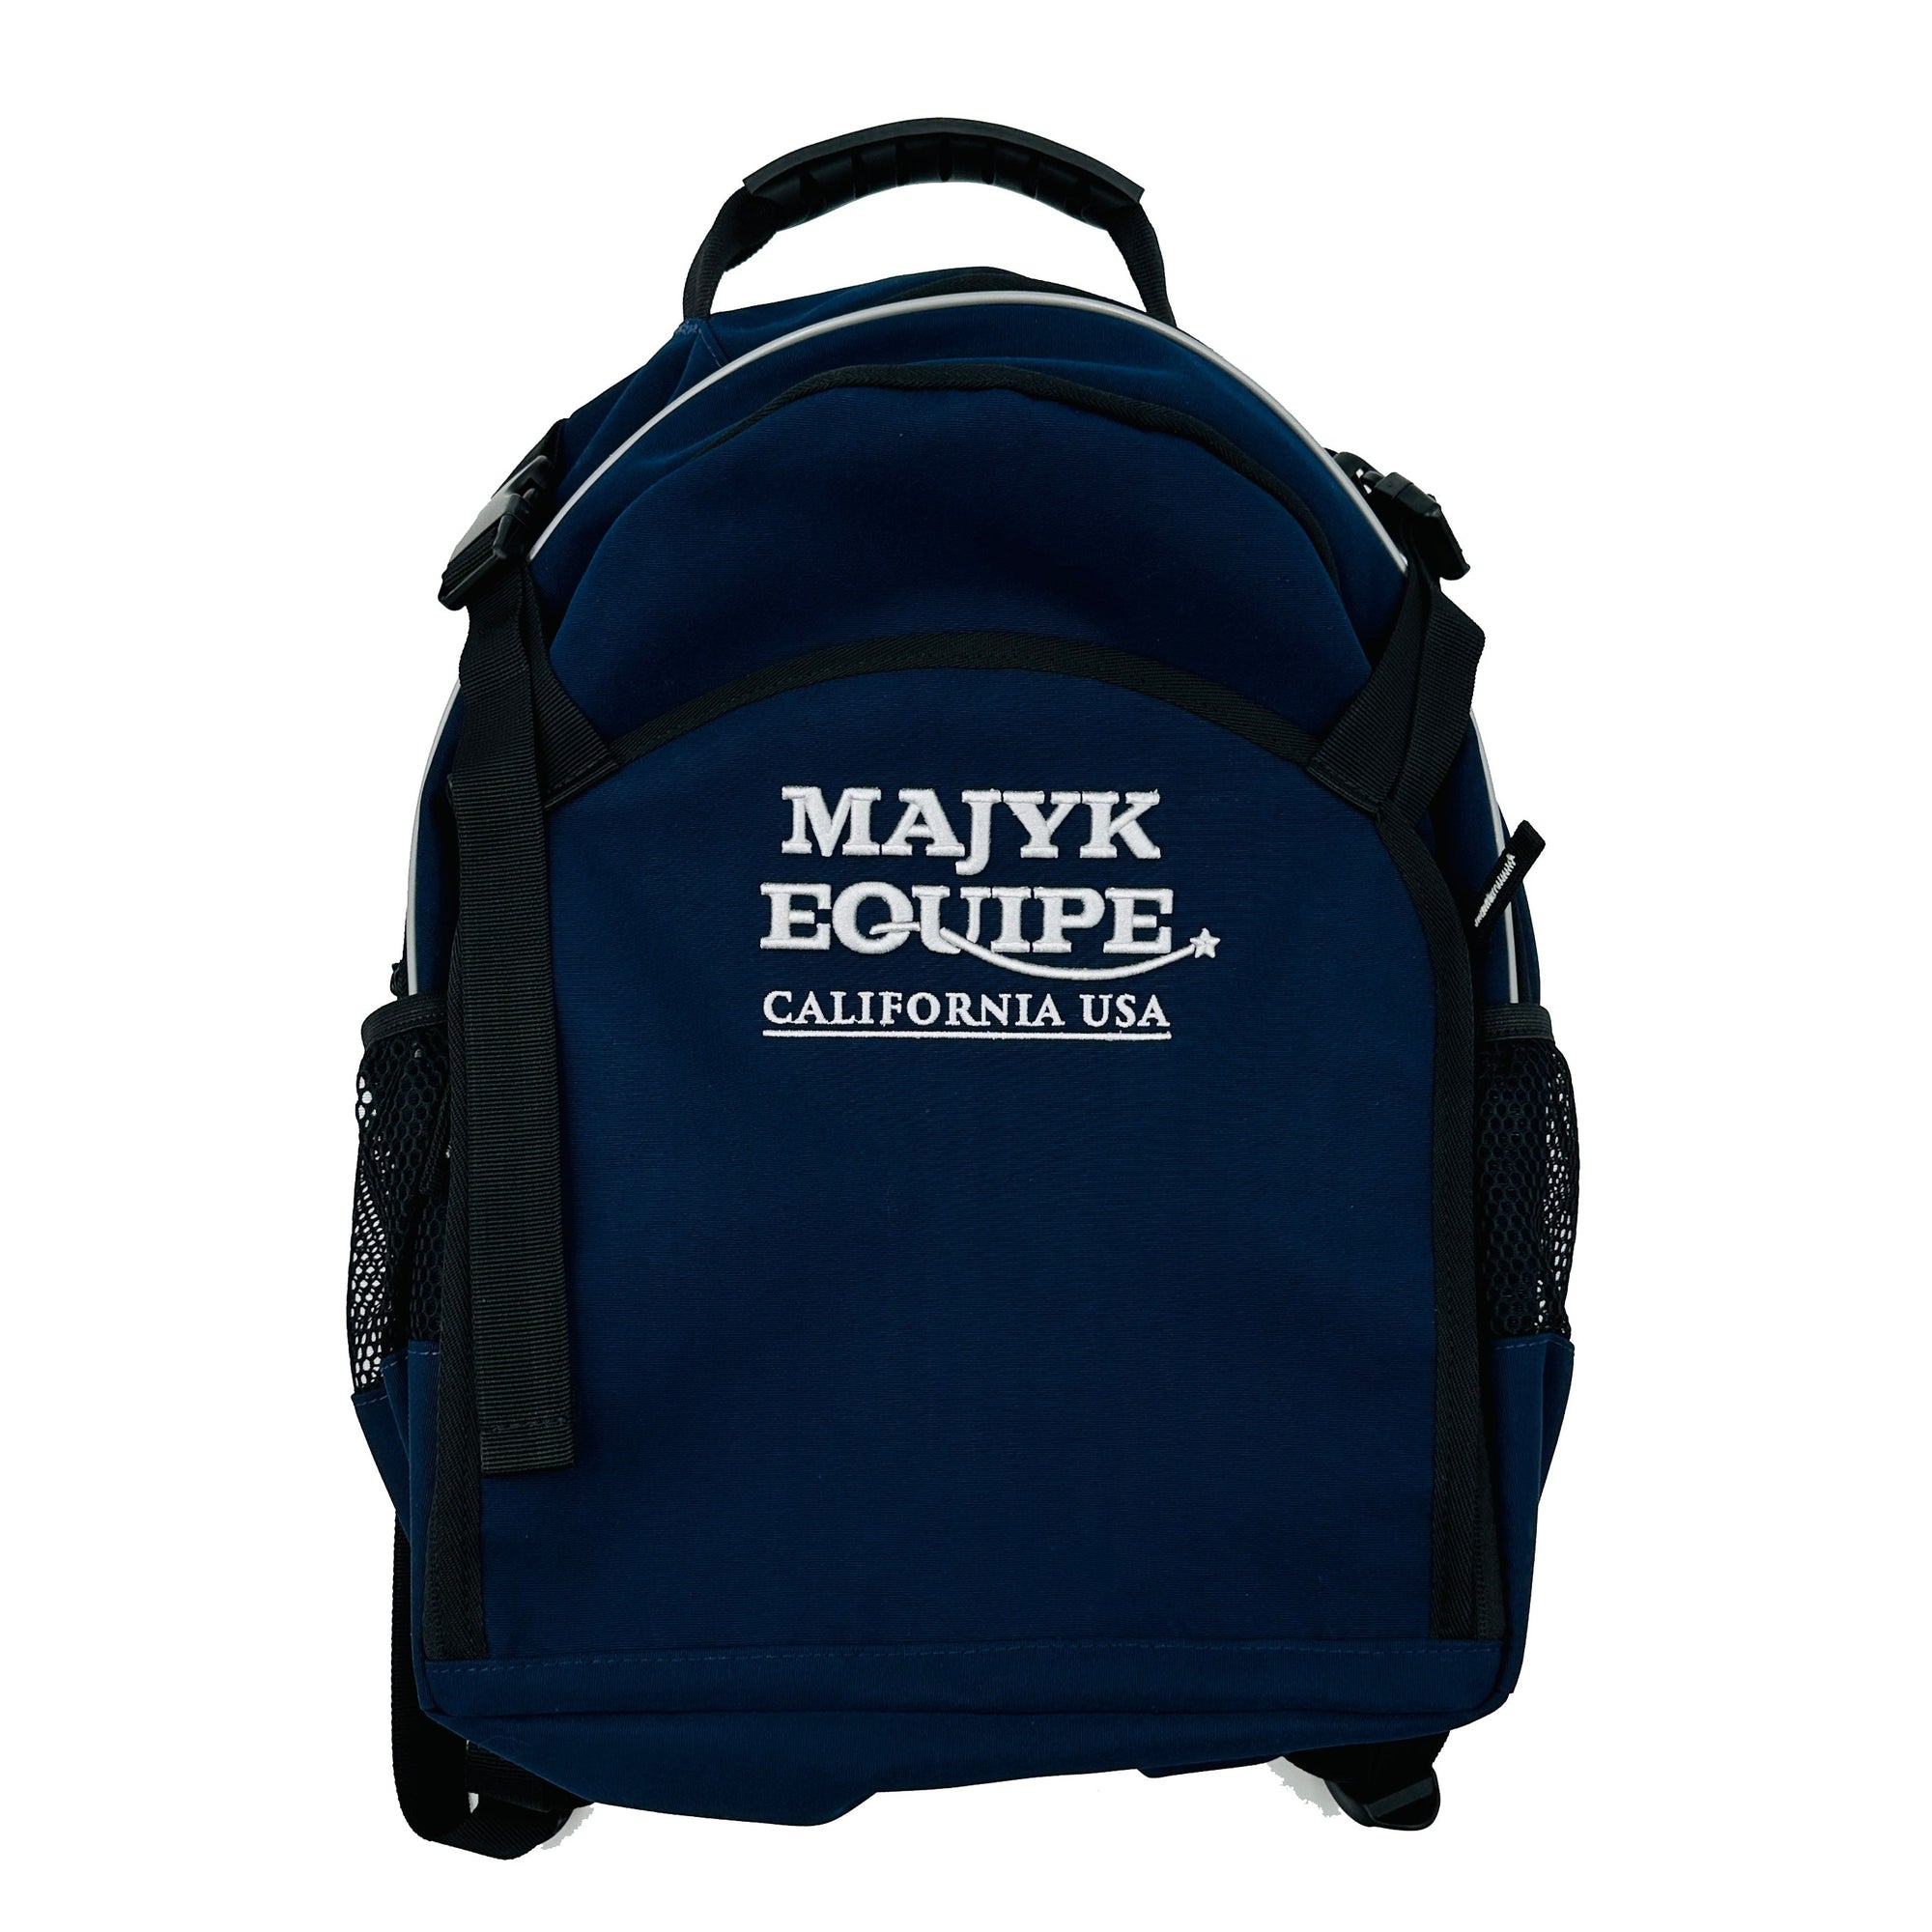 Majyk Equipe Show/Barn Bag with Hat Compartment - Majyk Equipe